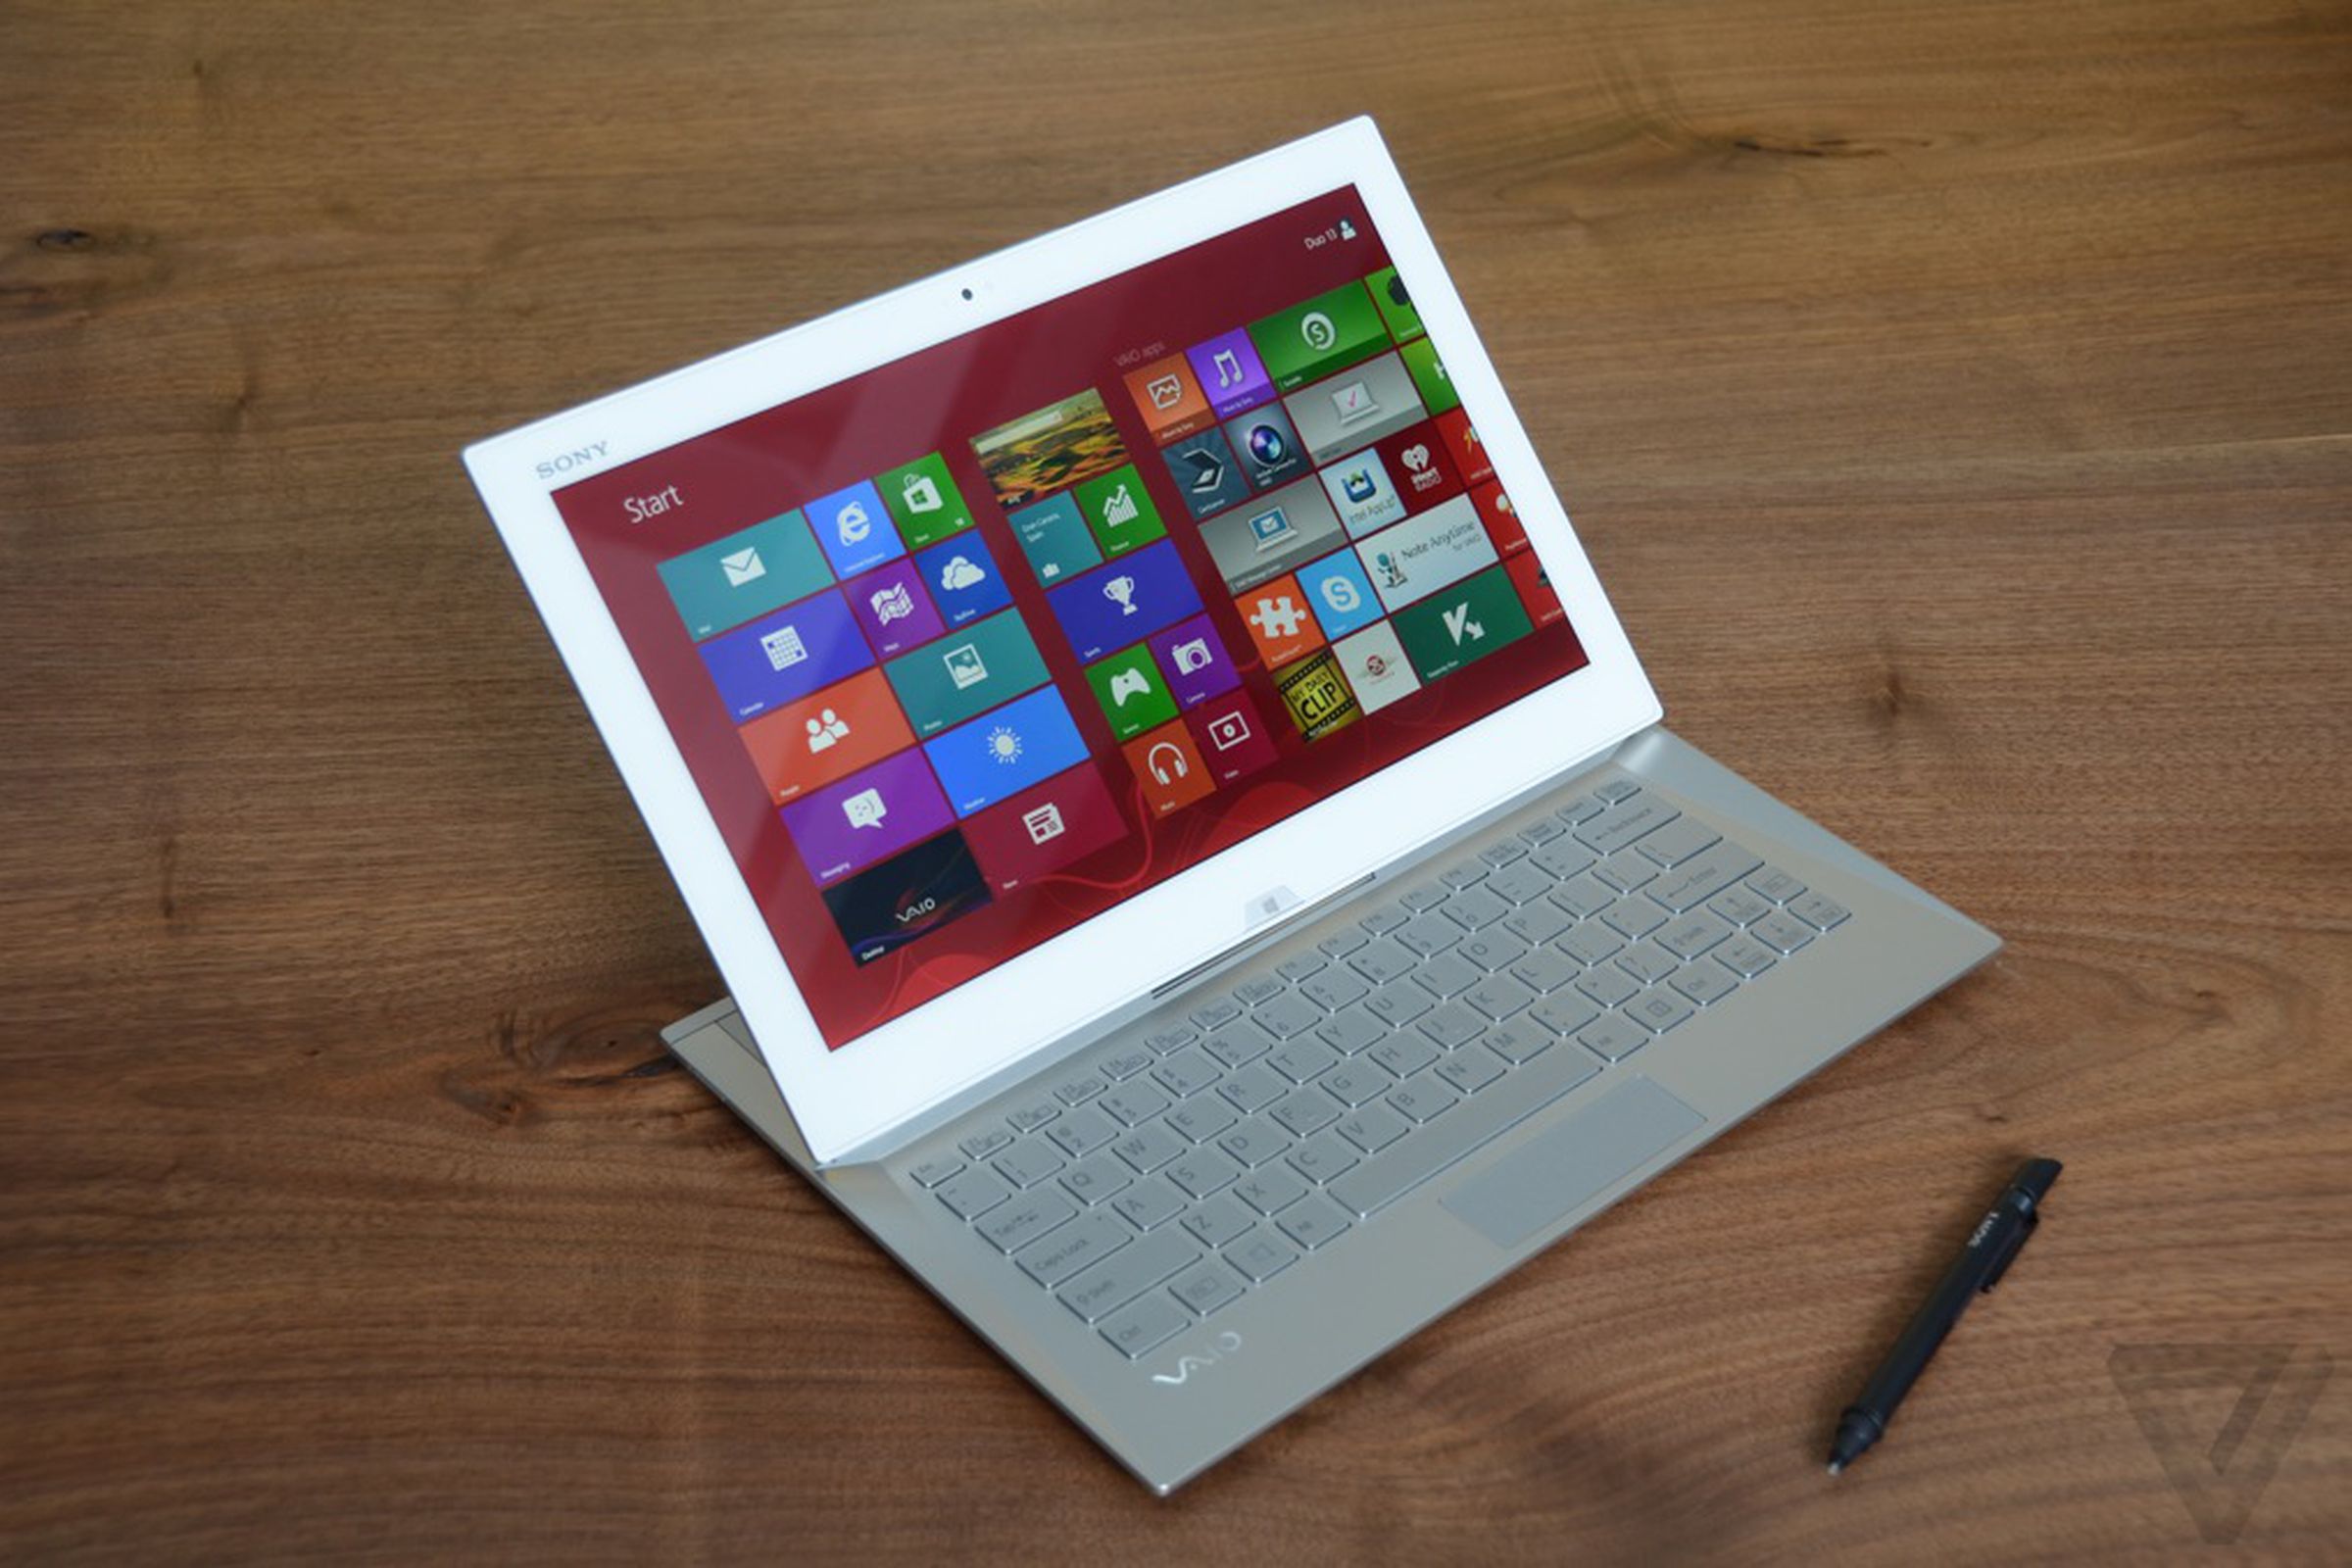 Gallery Photo: Sony VAIO Duo 13 pictures